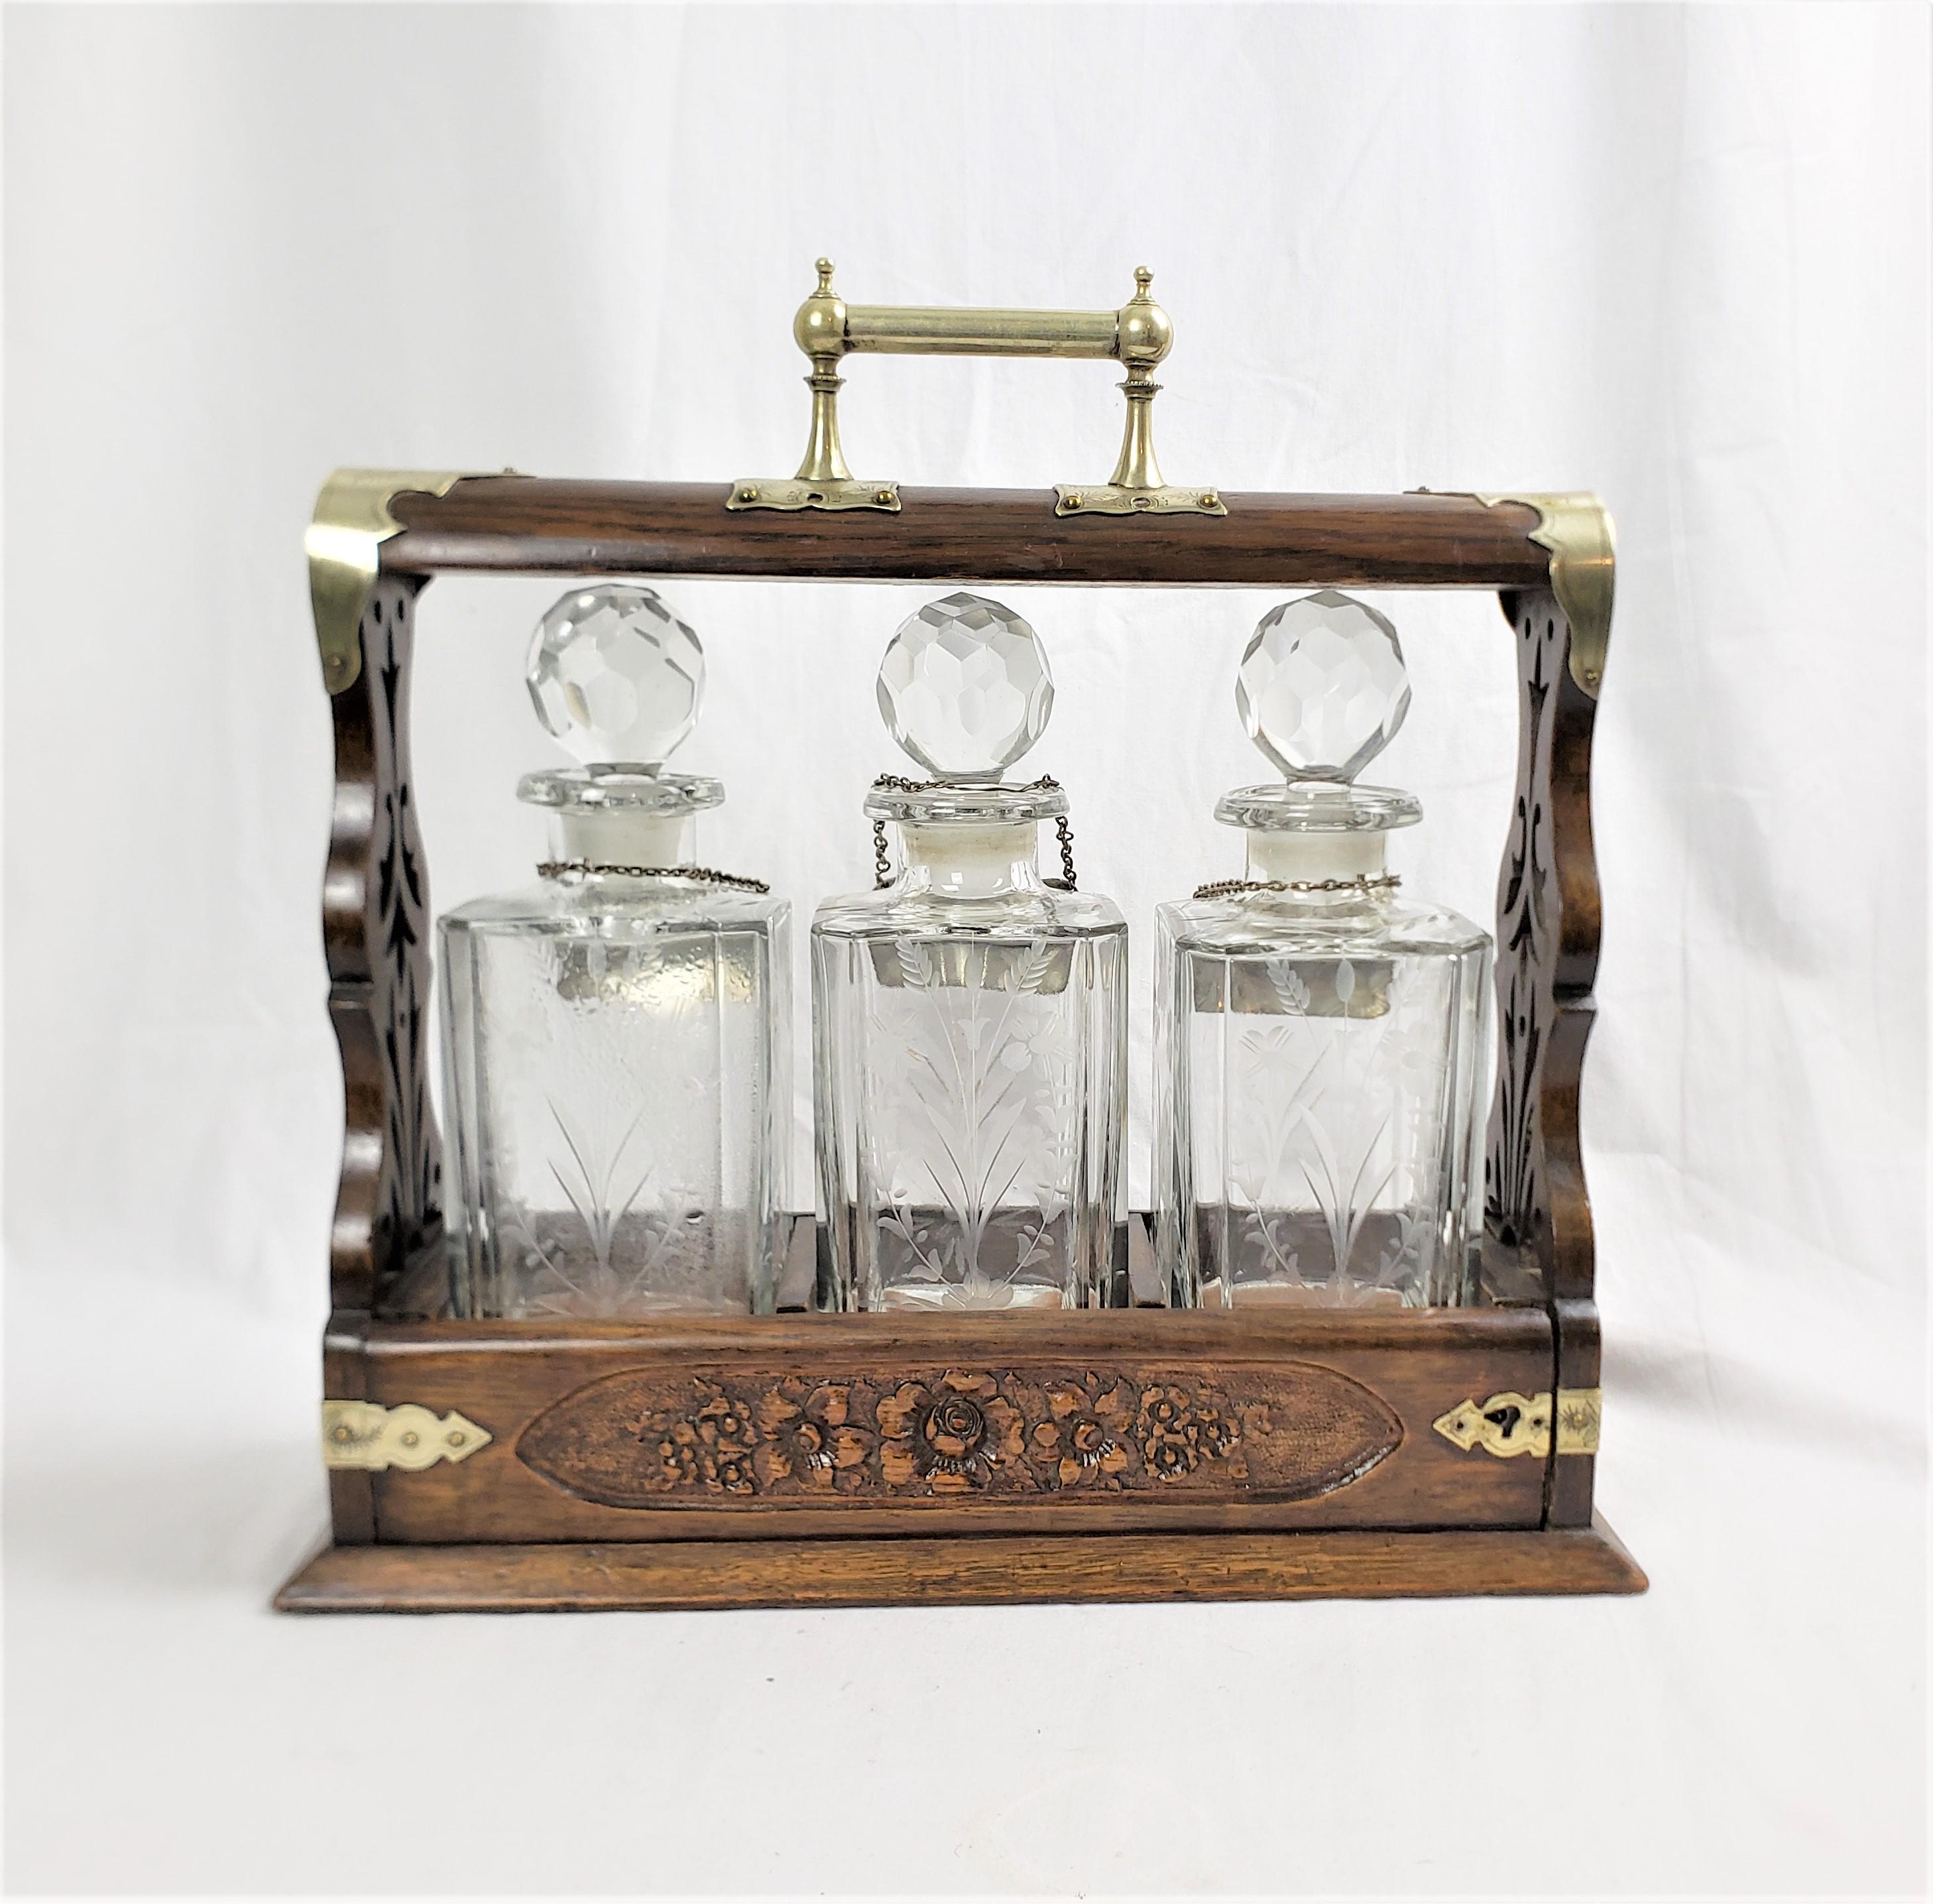 19th Century Antique English Three Bottle Oak Tantalus with Etched Floral & Engraved Accents For Sale